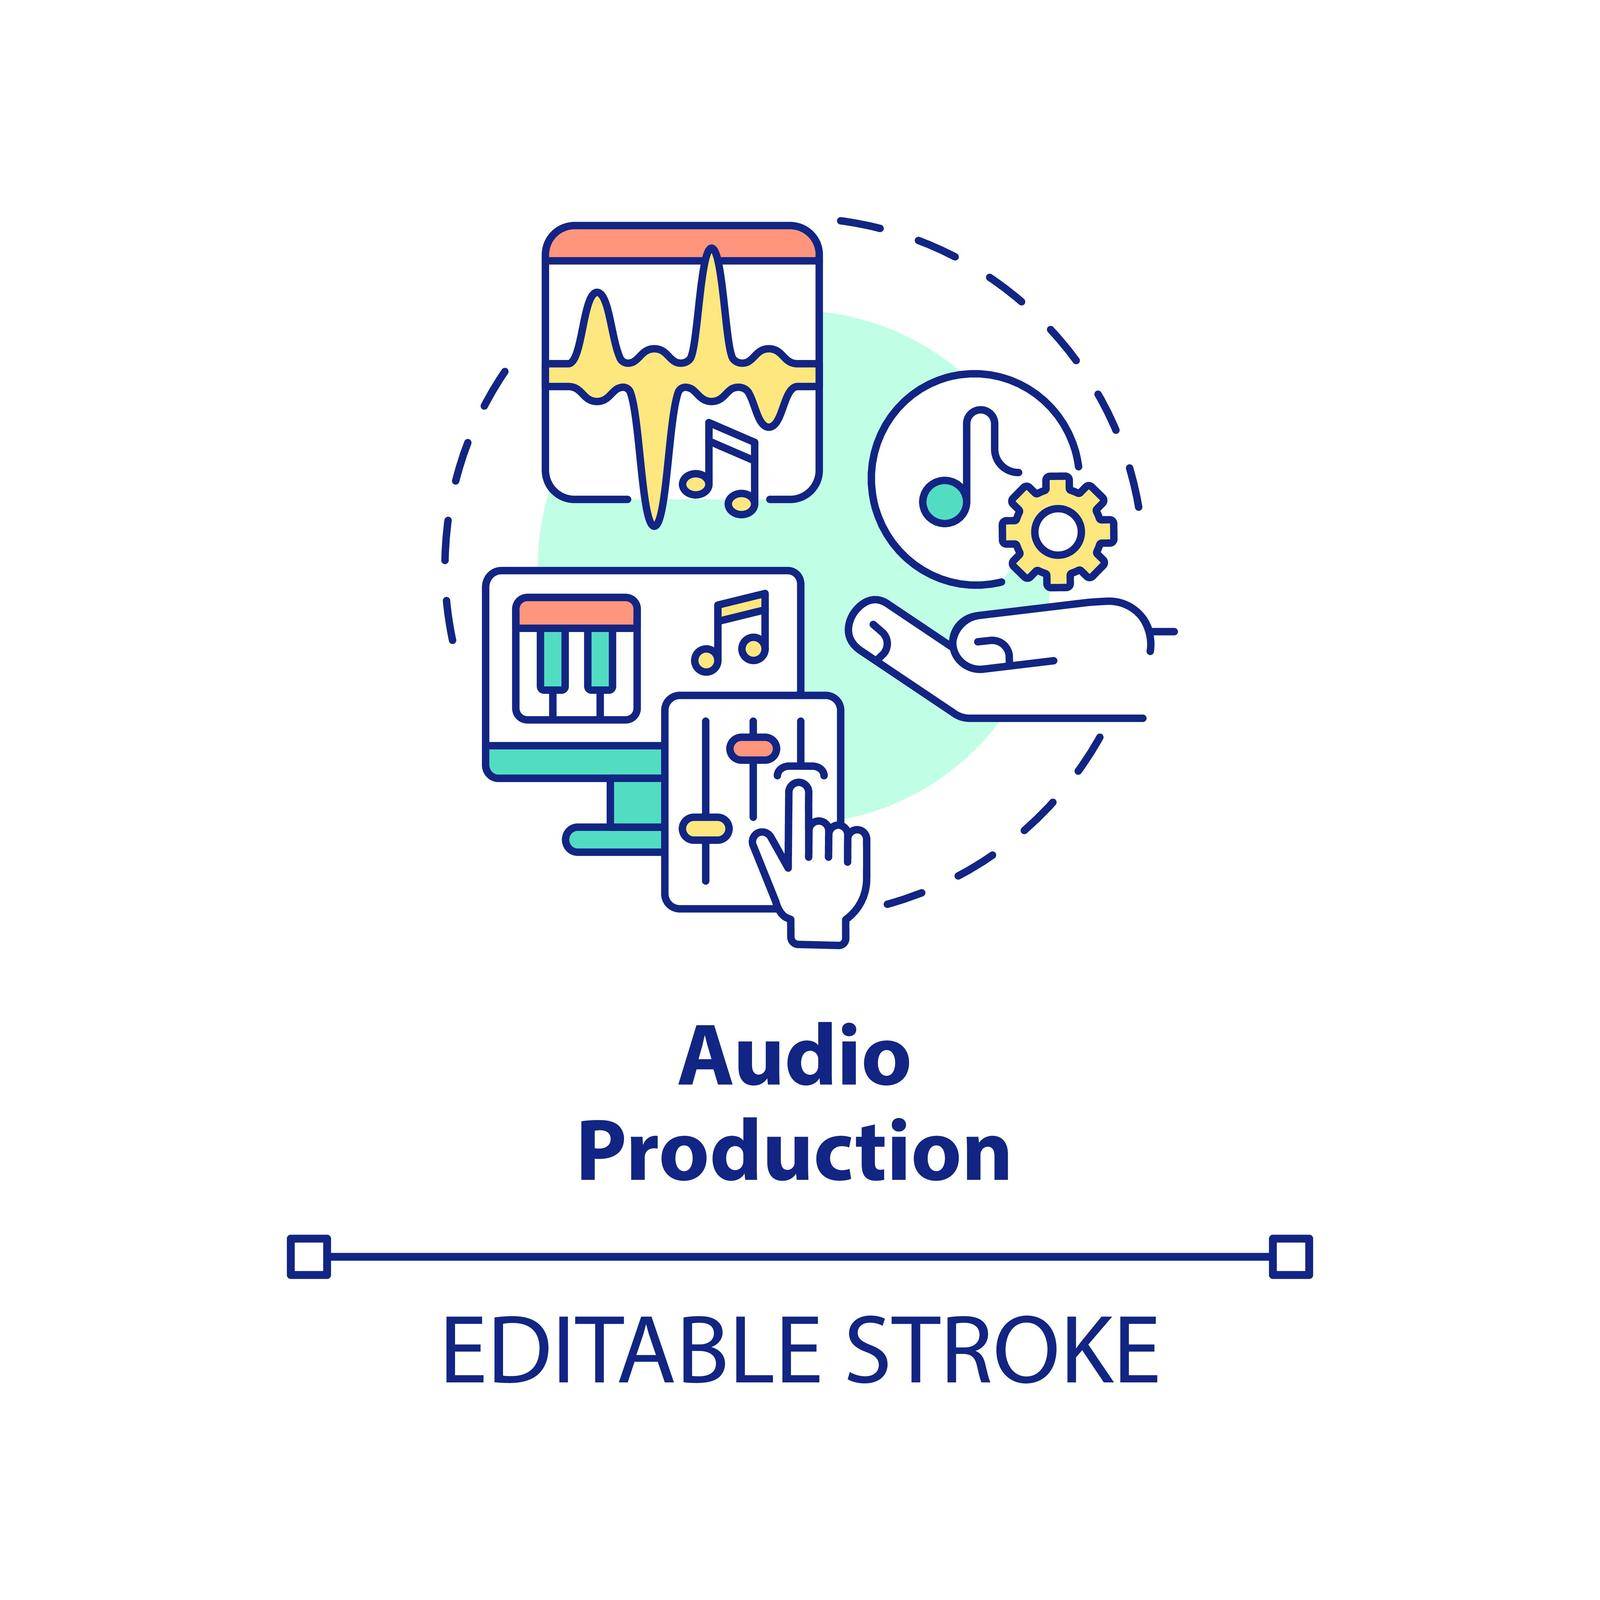 Audio production concept icon by bsd